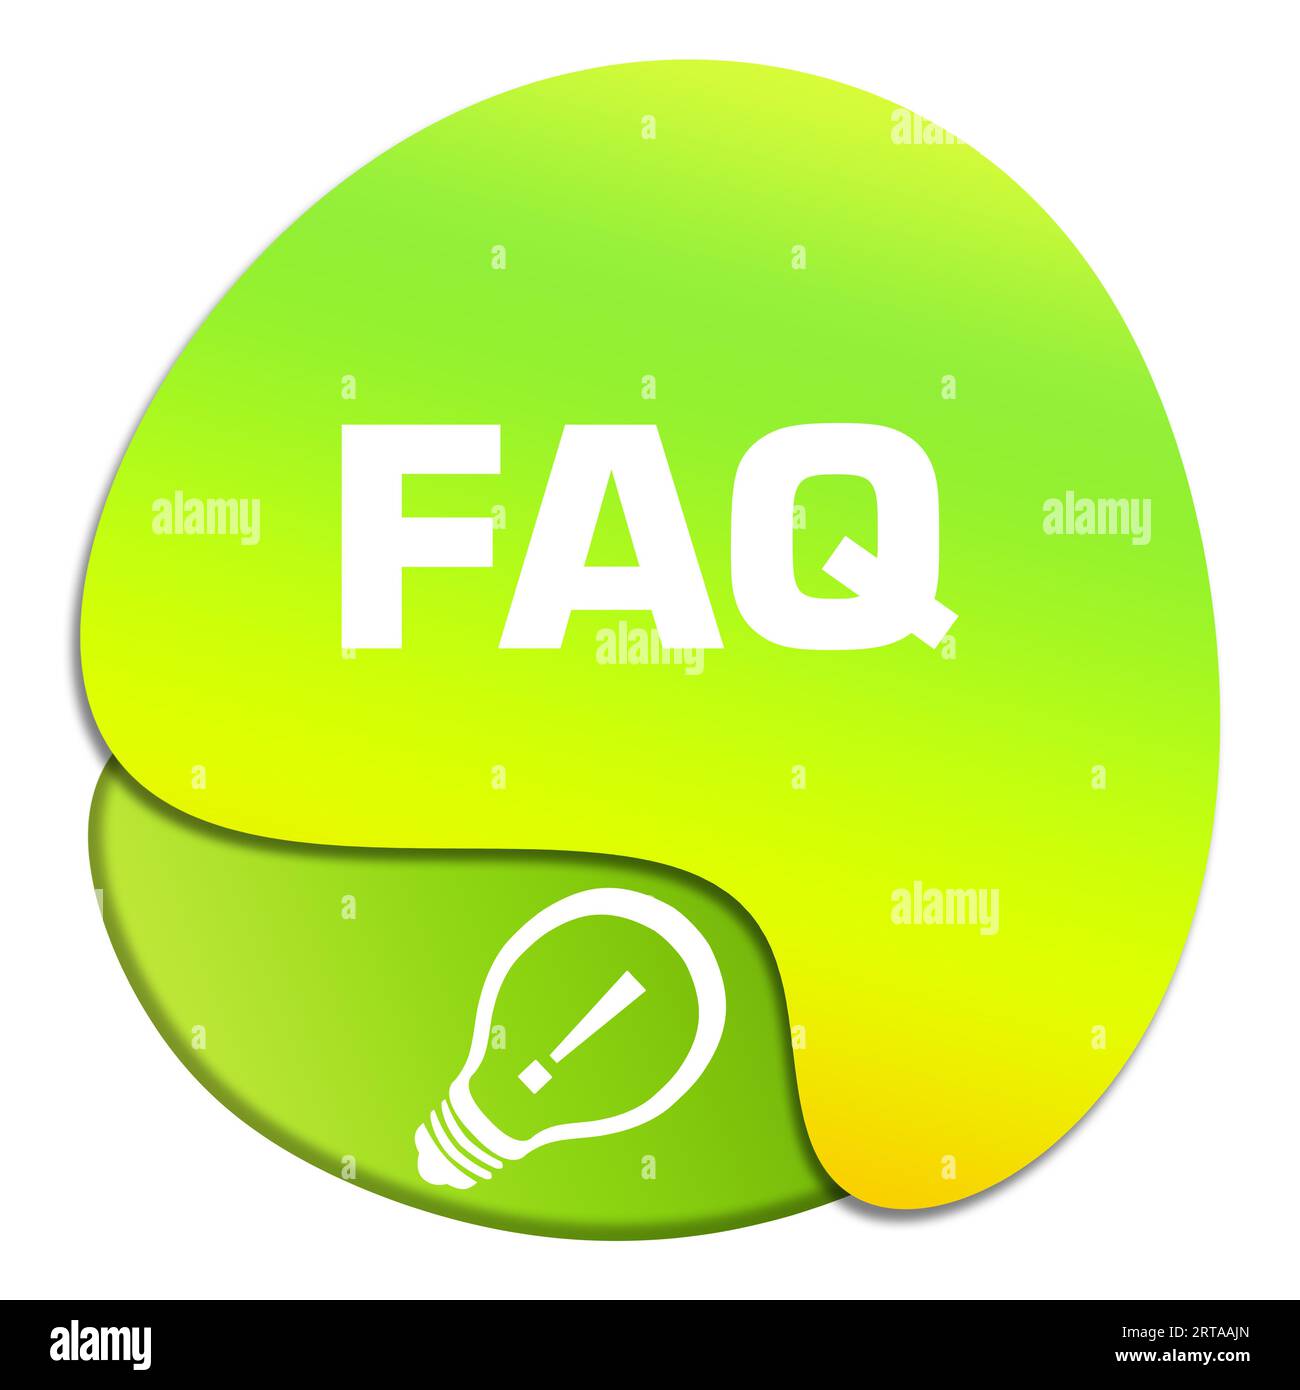 FAQ - Frequently Asked Questions Green yellow Gradient Bulb Text Circular Stock Photo